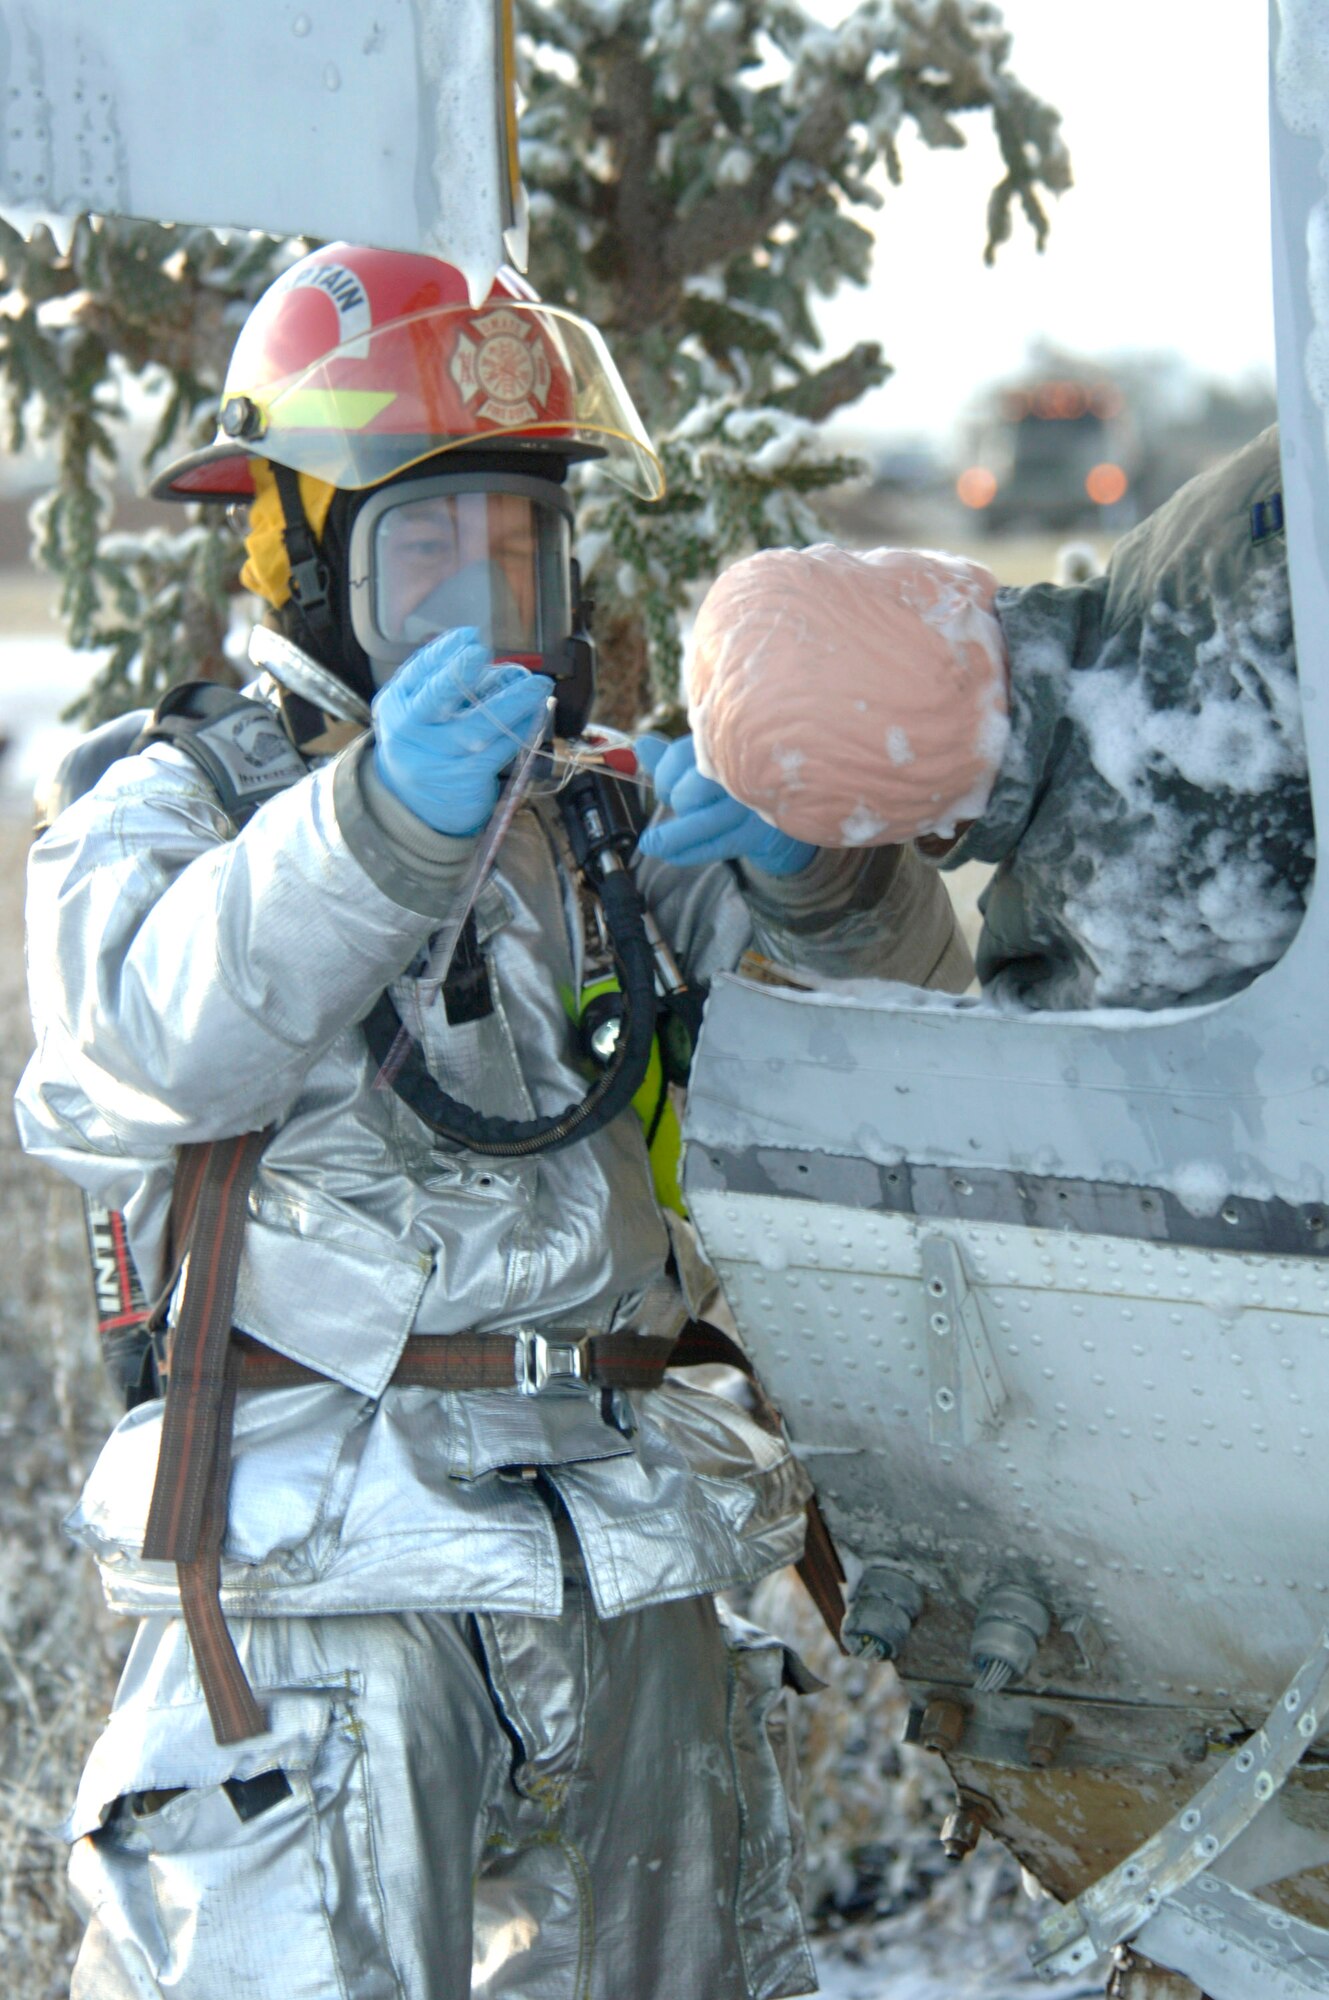 A firefighter assesses the condition of a simulated survivor found at the scene of an aircraft accident Dec. 4 at Davis-Monthan Air Force Base, Ariz., during Vigilant Shield 07. Vigilant Shield 07 is a joint nuclear weapon accident exercise designed to train Department of Defense and federal agencies on response efforts as a cohesive team. The exercise involved a variety of agencies representing the county, state and federal governments. (U.S. Air Force photo/Senior Airman Christina D. Ponte)